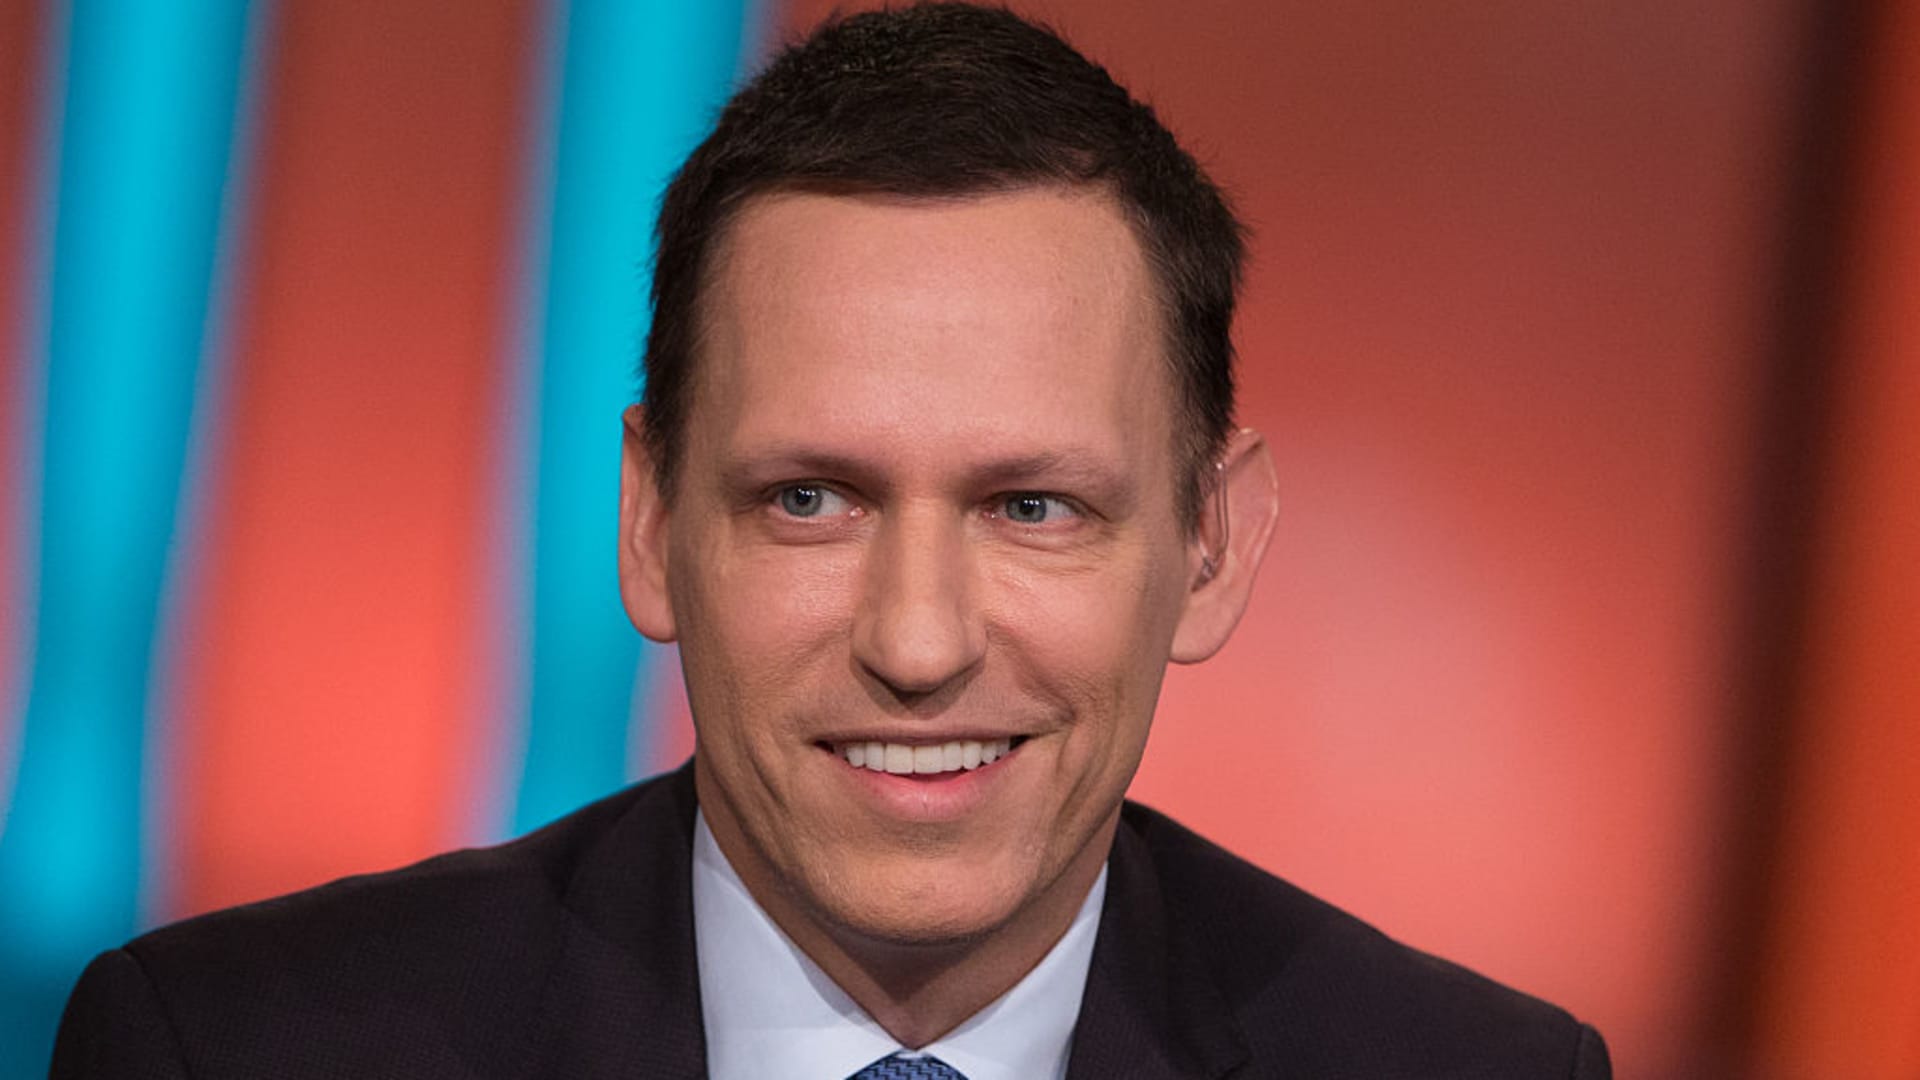 Peter Thiel says Silicon Valley has 'jumped the shark' and there may be no more big consumer internet companies